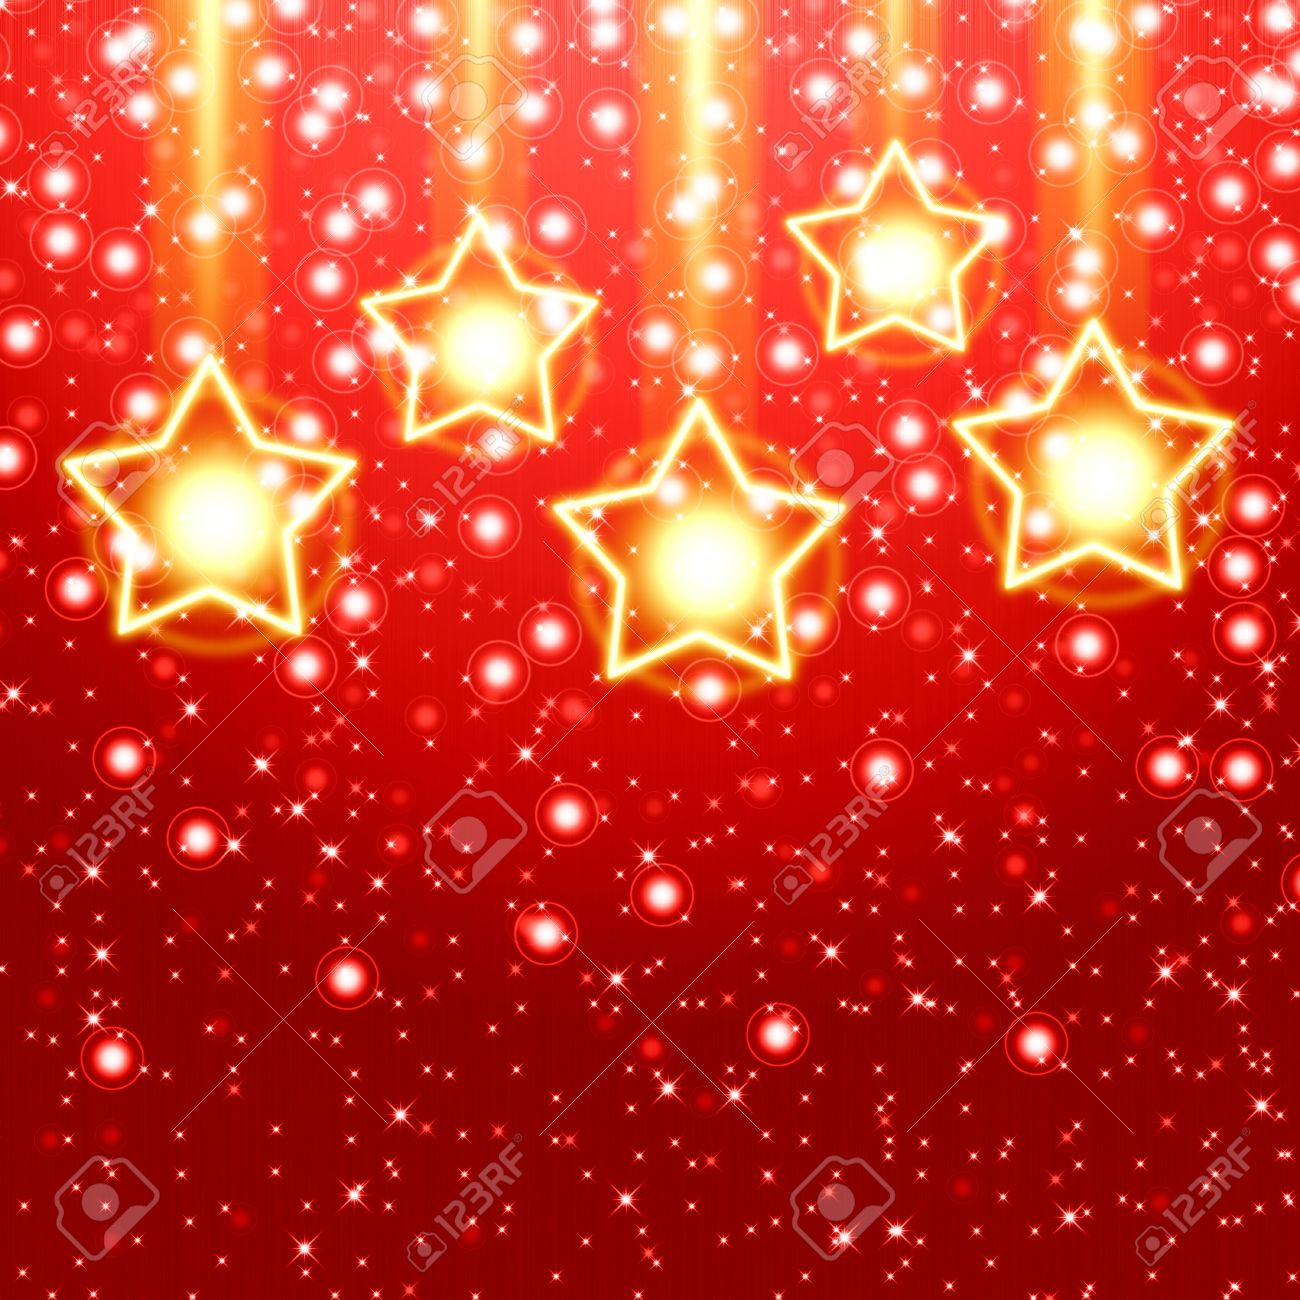 Stars on red background